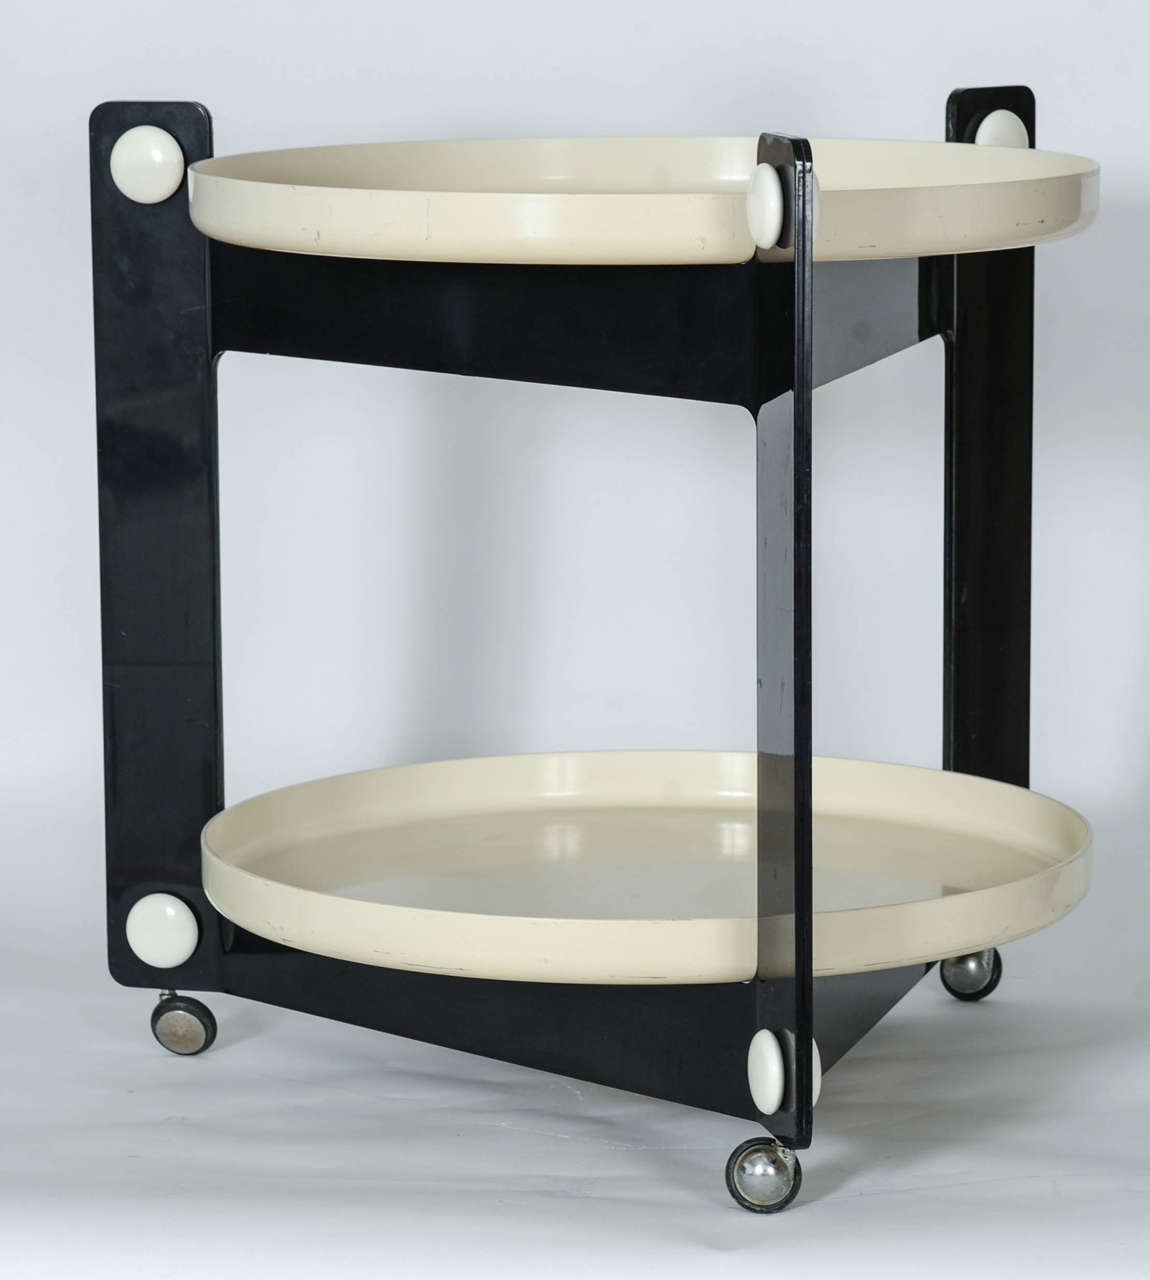 Very stylish trolley in black and off-white by Guzzini. 
The two detachable serving trays have a diameter of 56 centimeters.
The wheels allow for easy use at pool side or cocktail bar.